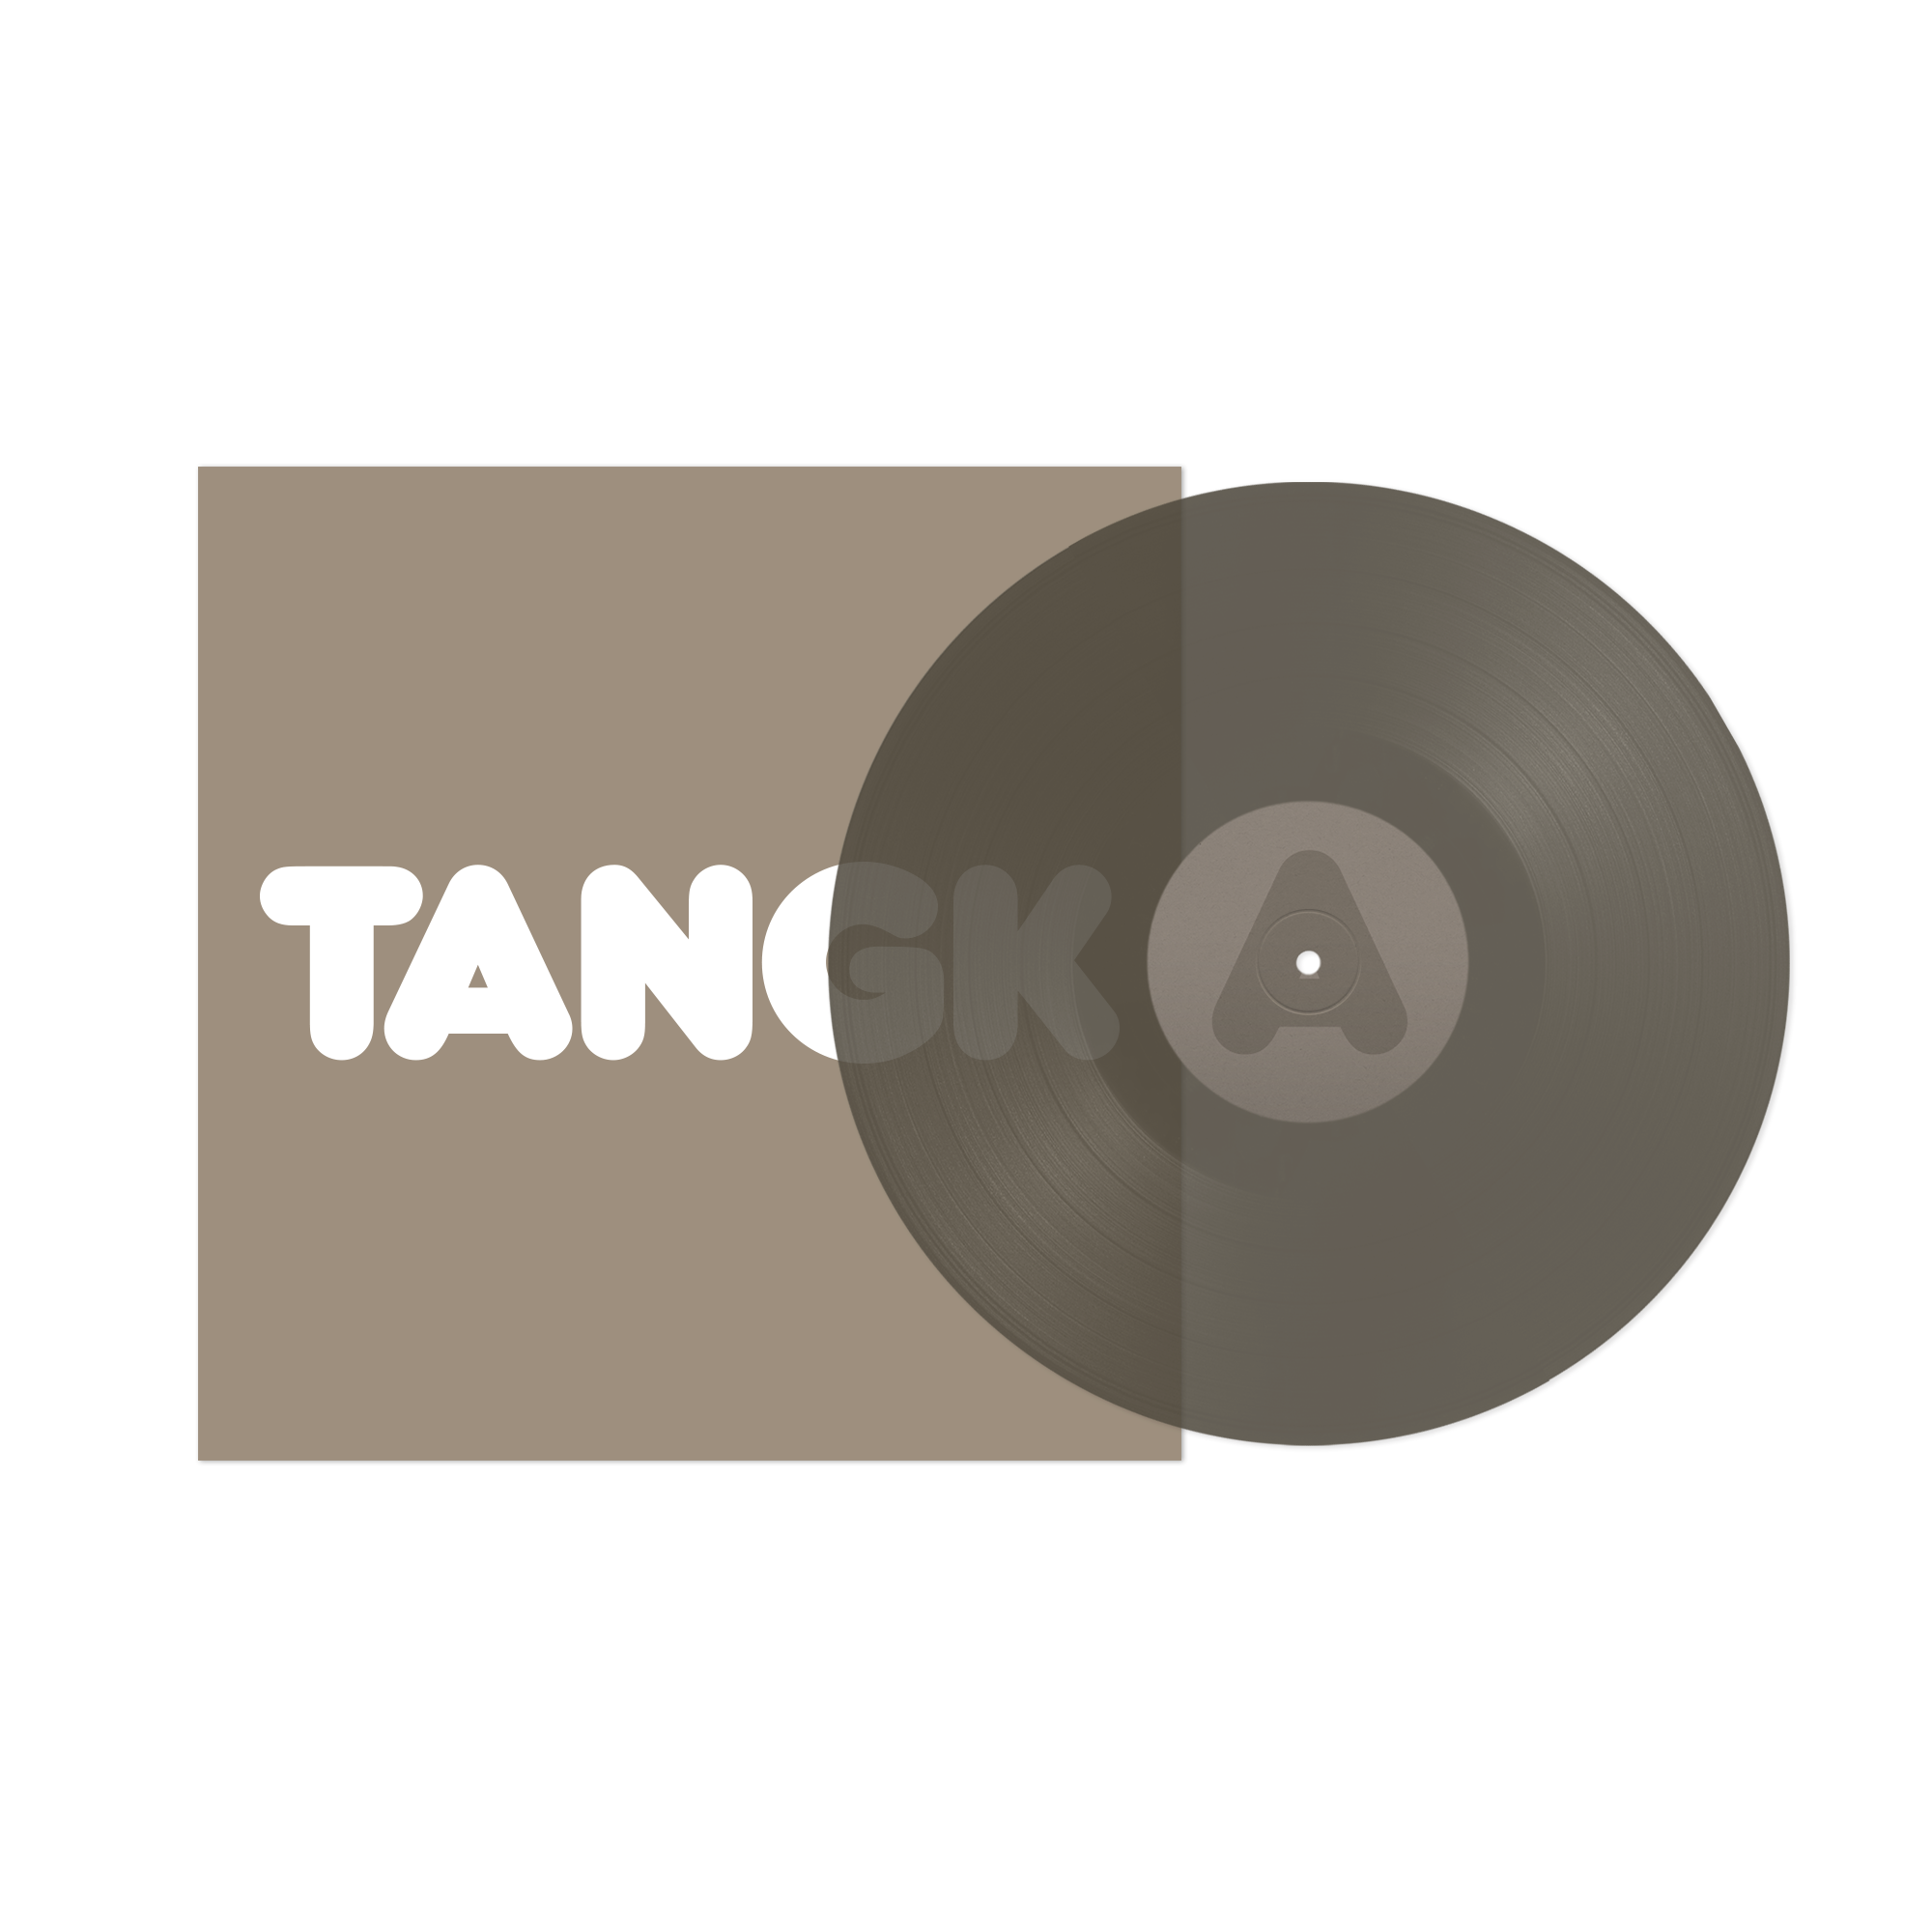 TANGK (LIMITED EDITION COLLECTOR’S D2C EXCLUSIVE PVC LP) + HARD ROCK FOR SOFTIES HOODIE BUNDLE